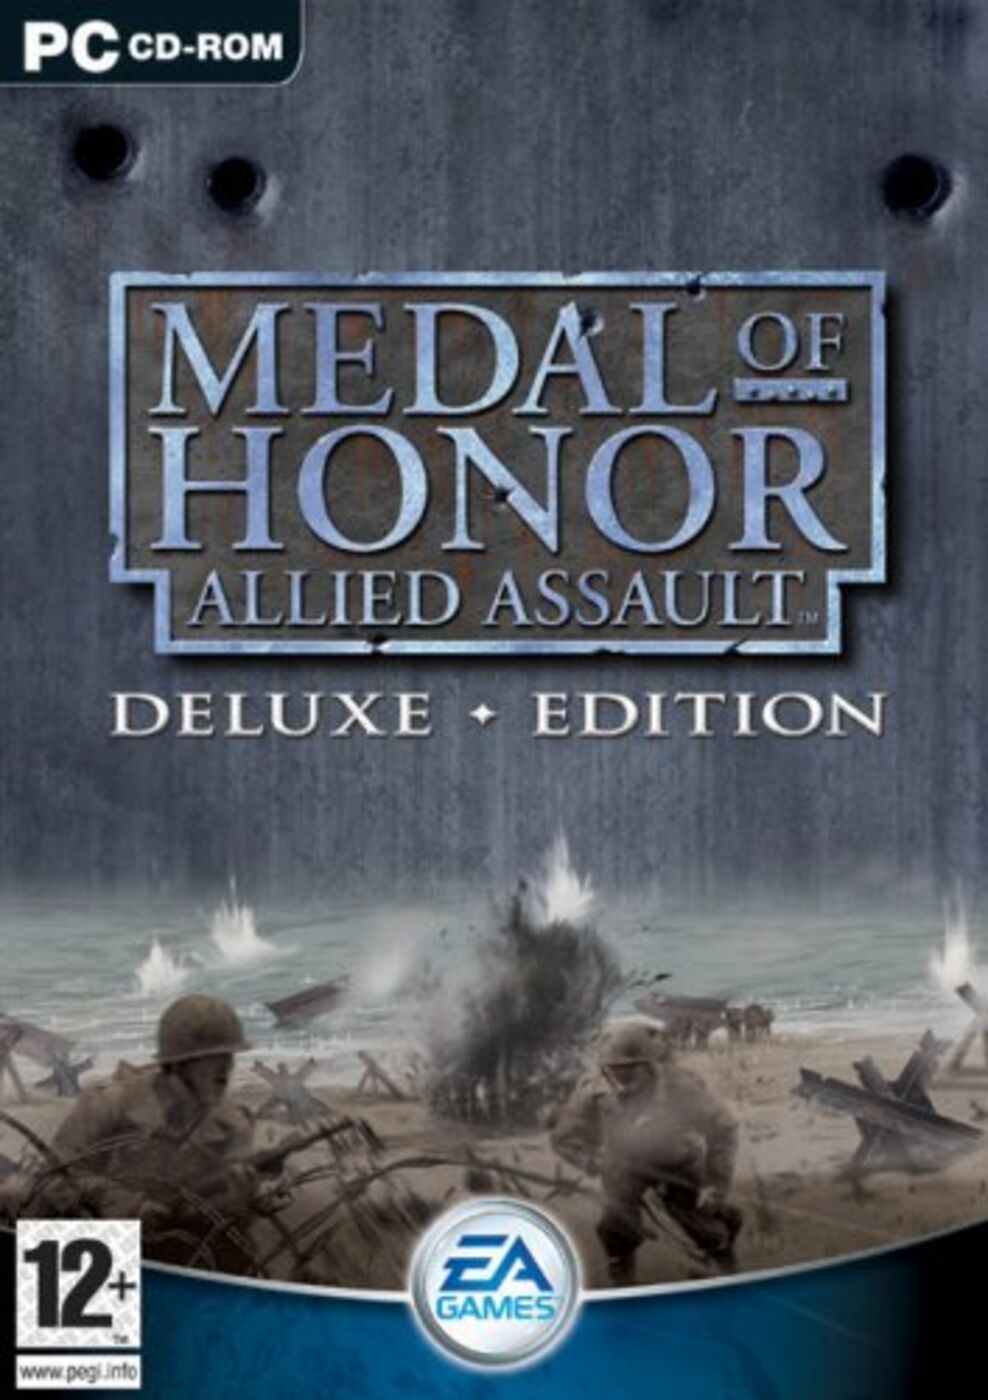 medal of honor allied assault system requirements windows 7